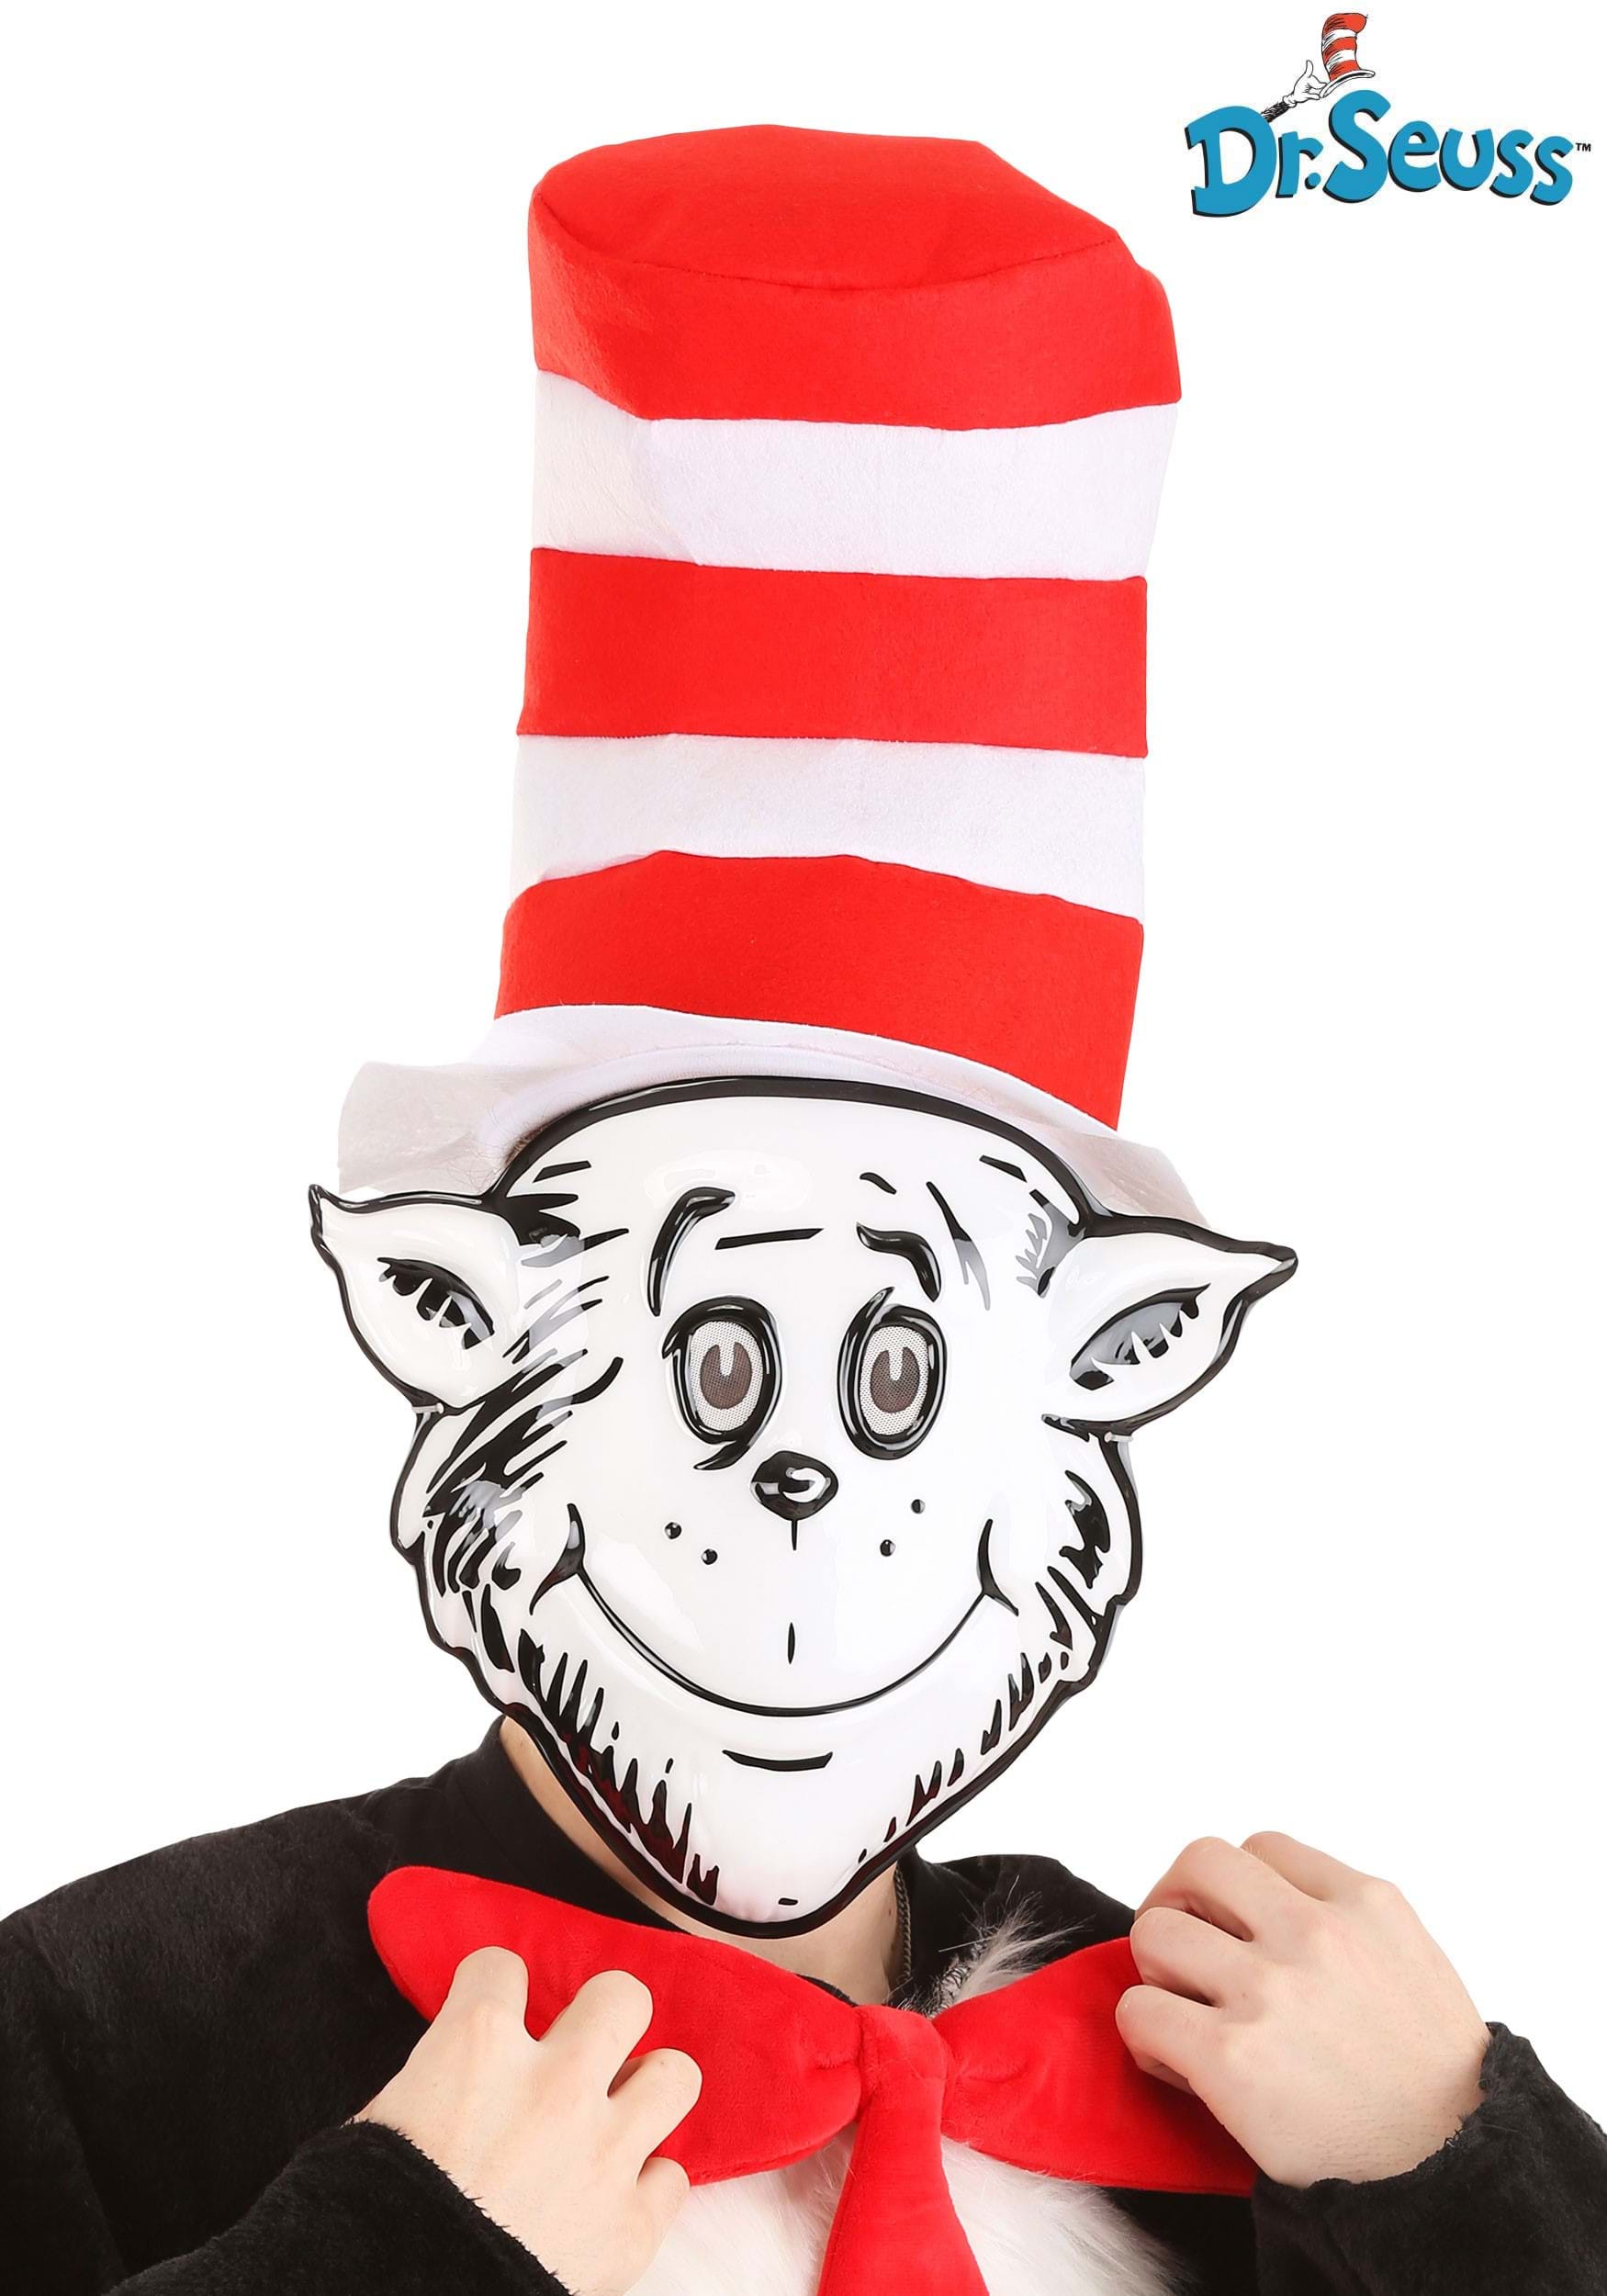 https://images.fun.com/products/71089/1-1/the-cat-in-the-hat-vacuform-mask-and-hat-kit.jpg